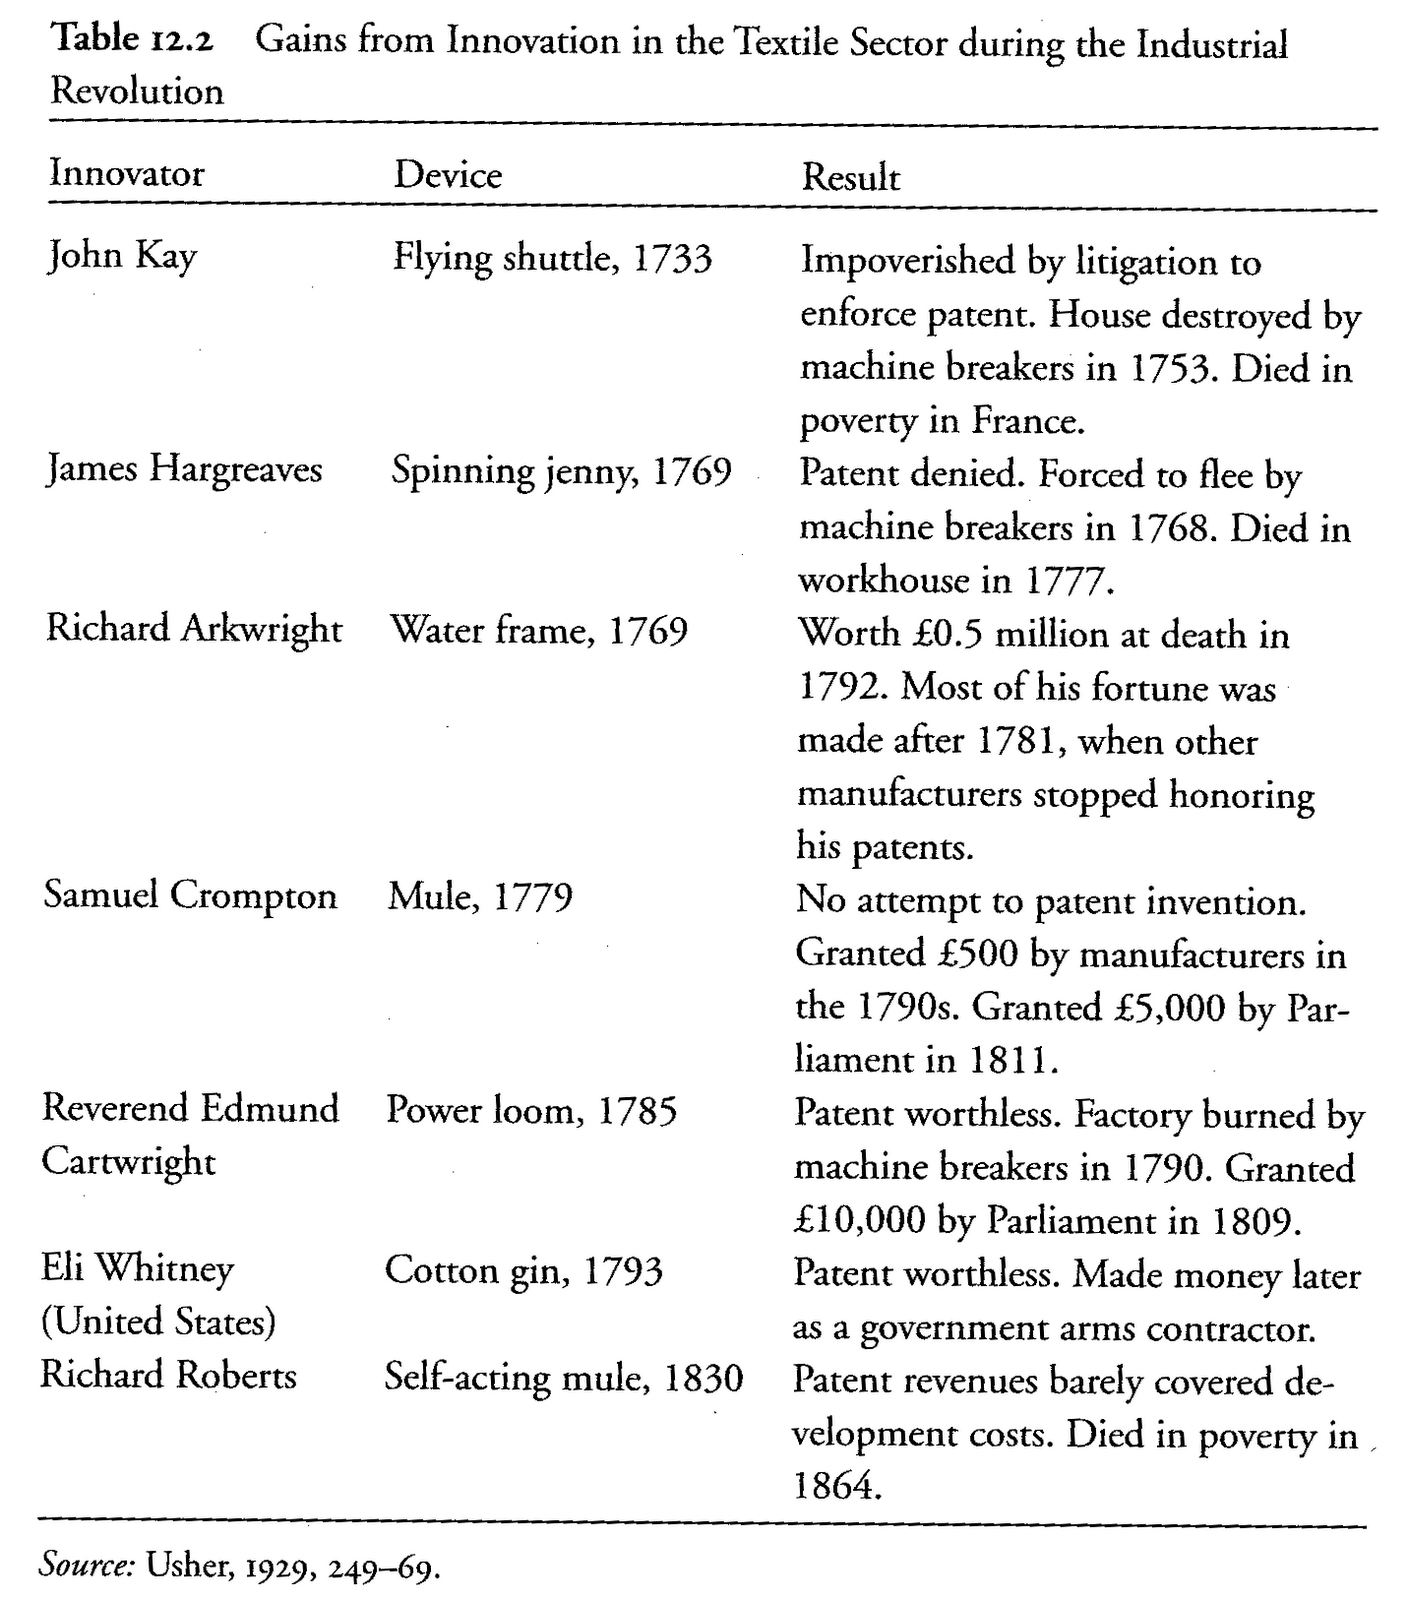 Table of the fates of the
inventors of the textile machinery that drove the Industrial
Revolution in England. From Gregory Clark's A Farewell to
Alms, p. 235